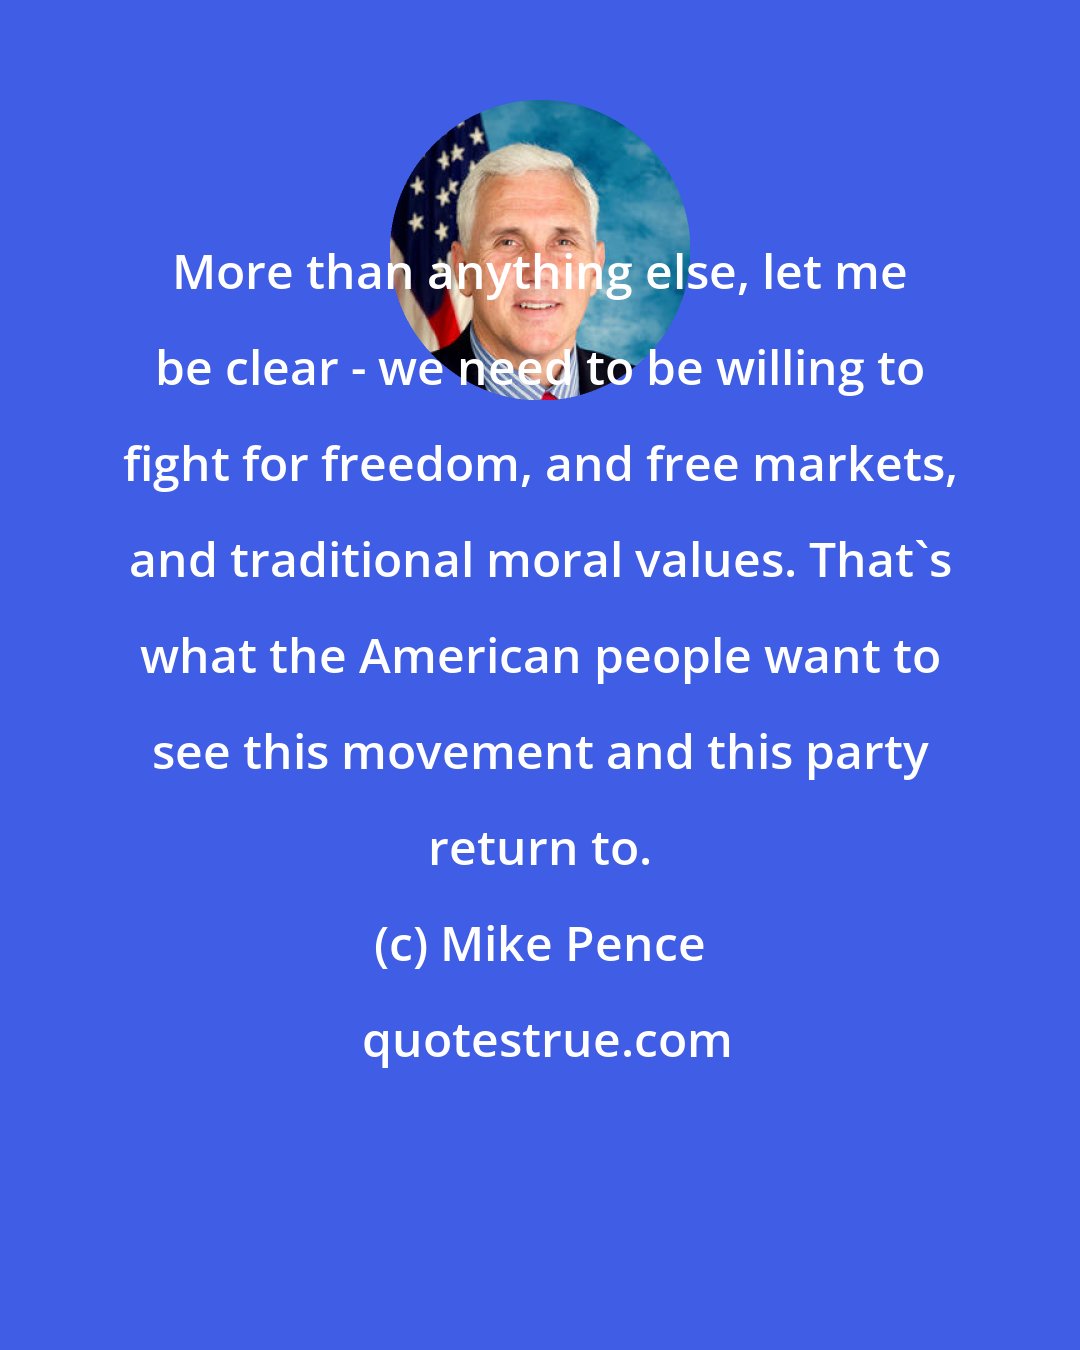 Mike Pence: More than anything else, let me be clear - we need to be willing to fight for freedom, and free markets, and traditional moral values. That's what the American people want to see this movement and this party return to.